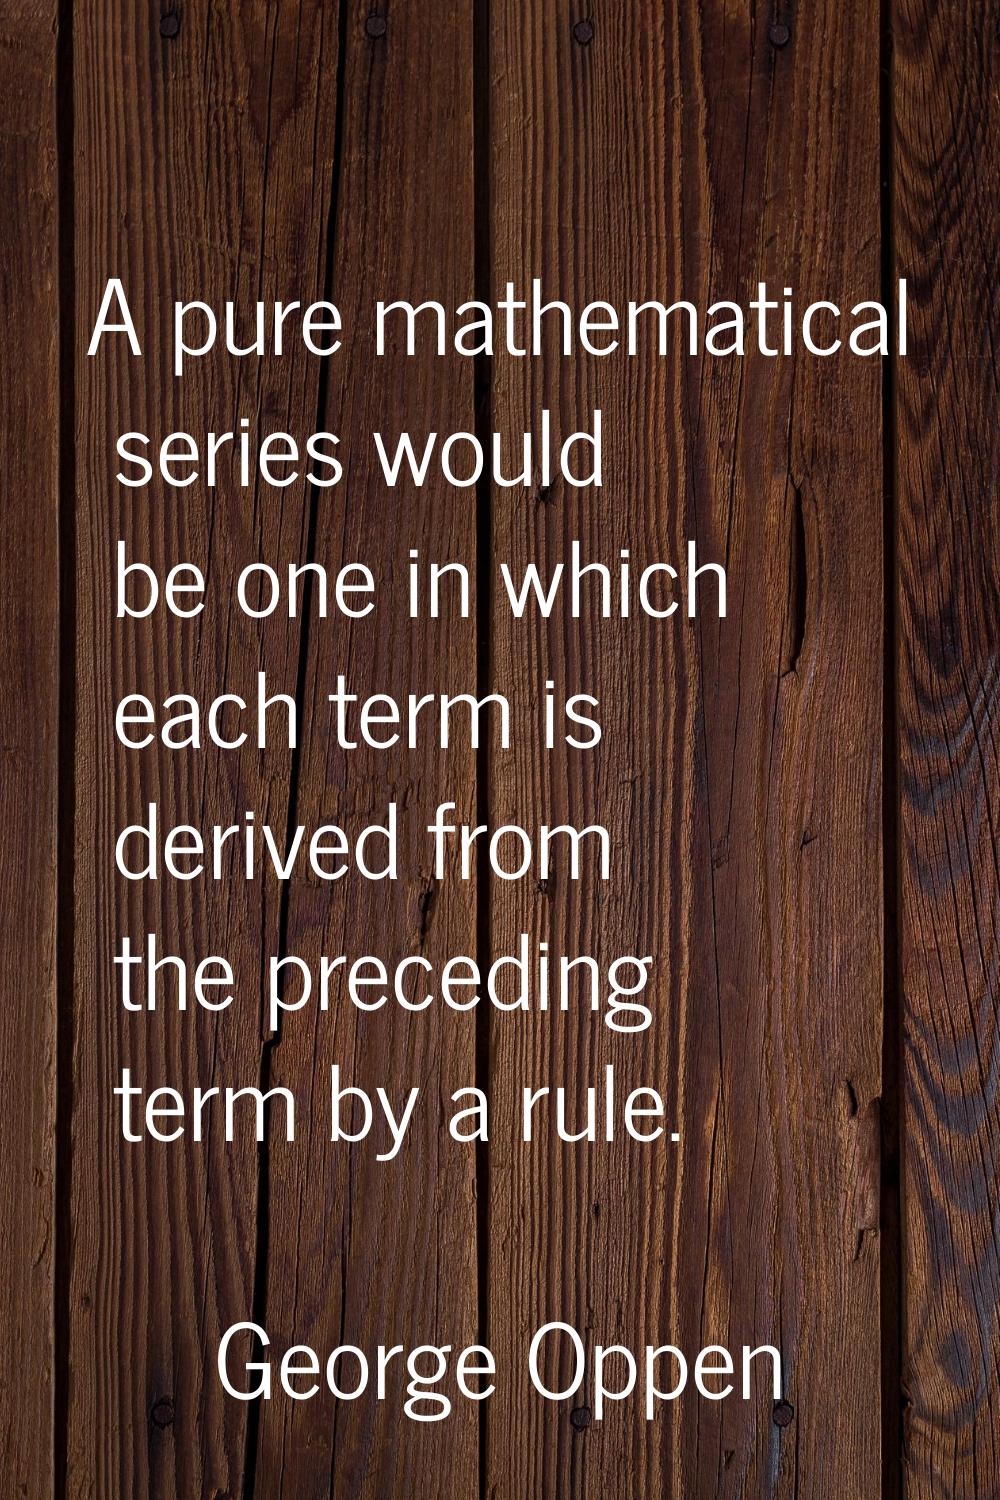 A pure mathematical series would be one in which each term is derived from the preceding term by a 